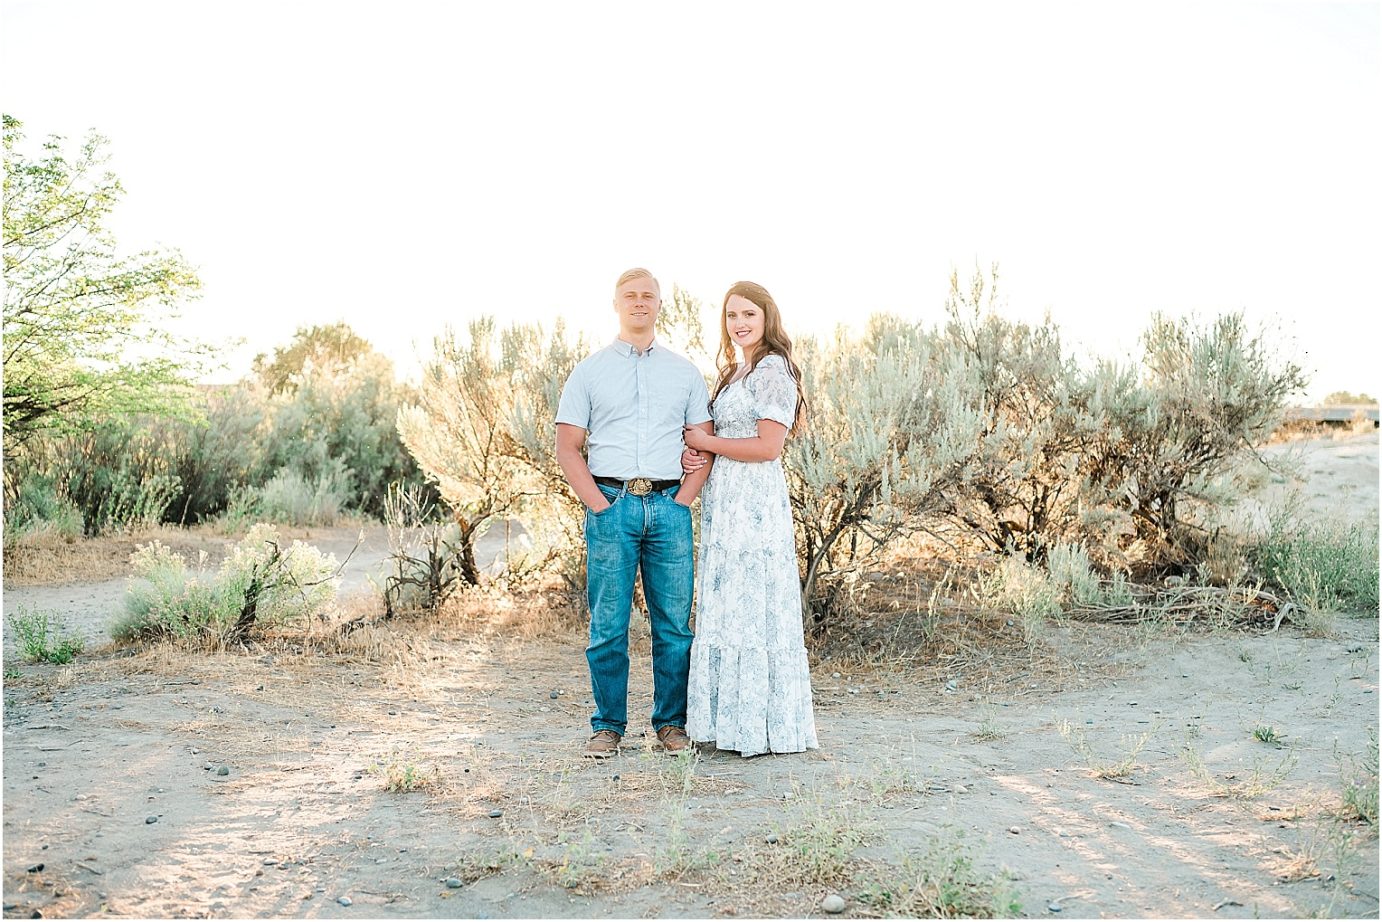 richland engagement session richland photographer Nate and Jacqueline standing in sagebrush